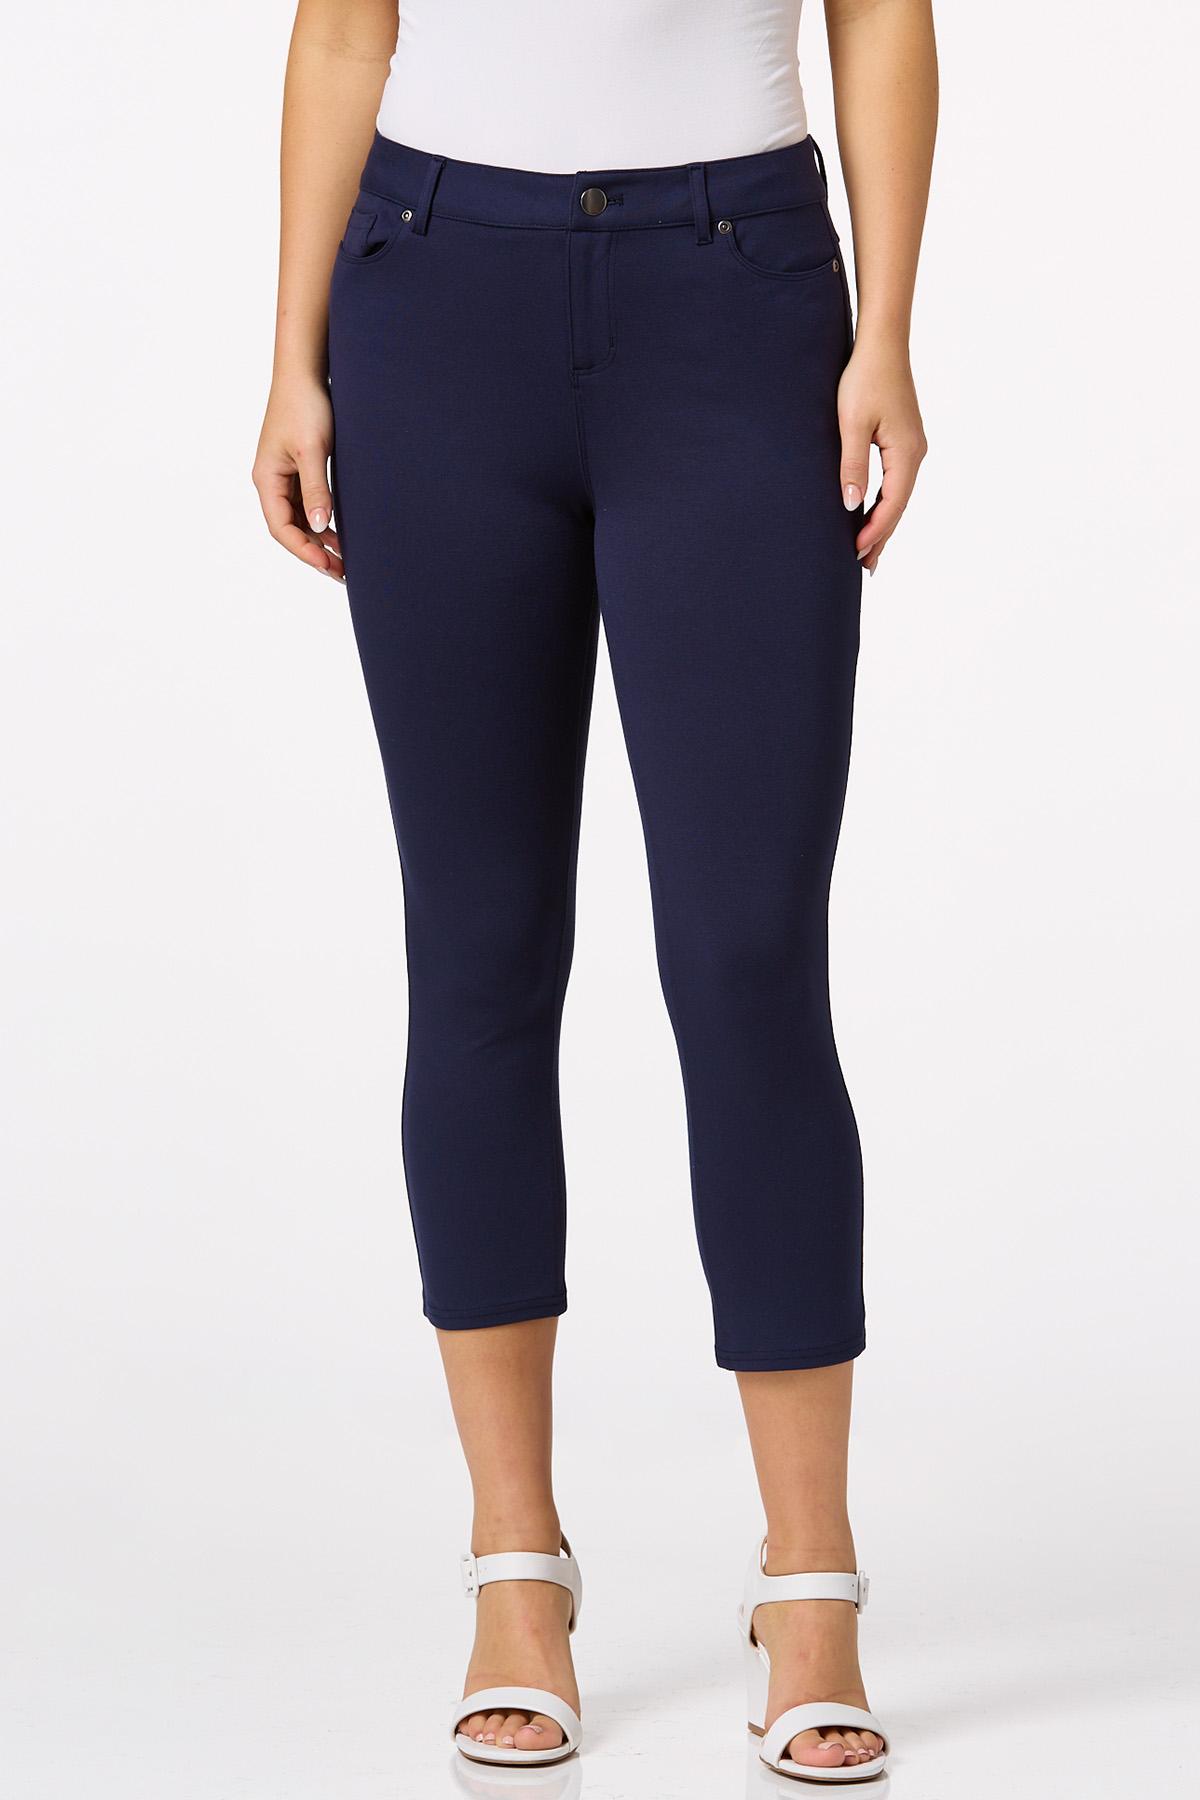 Cato Fashions  Cato Solid Ponte Skinny Pants